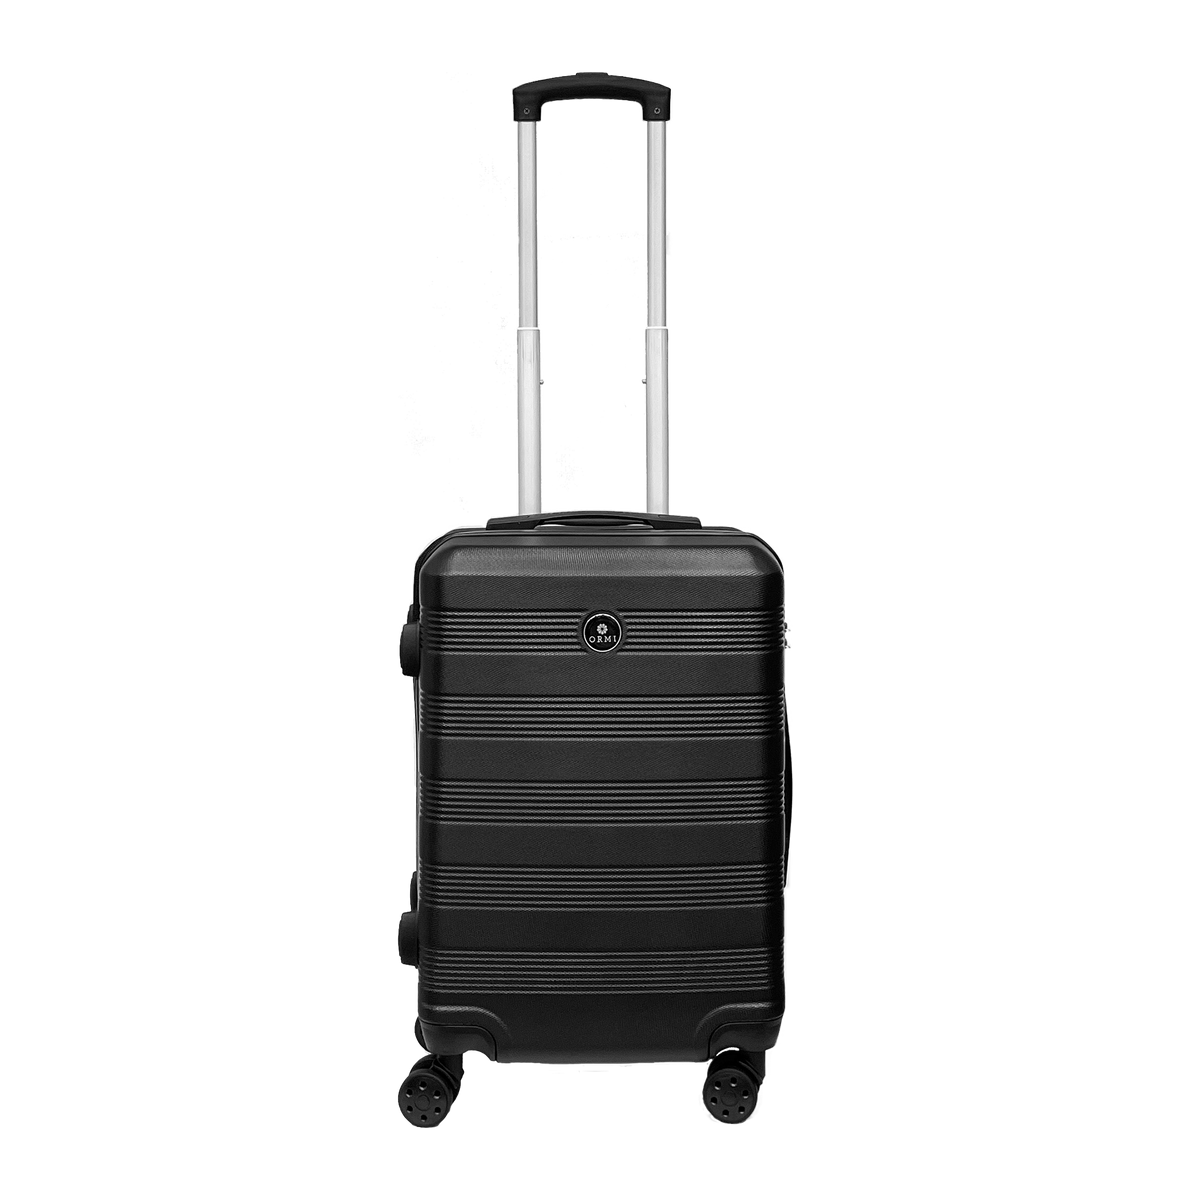 Ormi Tenwave Large Carry-On Trolley Luggage 55x40x22.5 cm: Ultra Lightweight and High-Quality Unisex